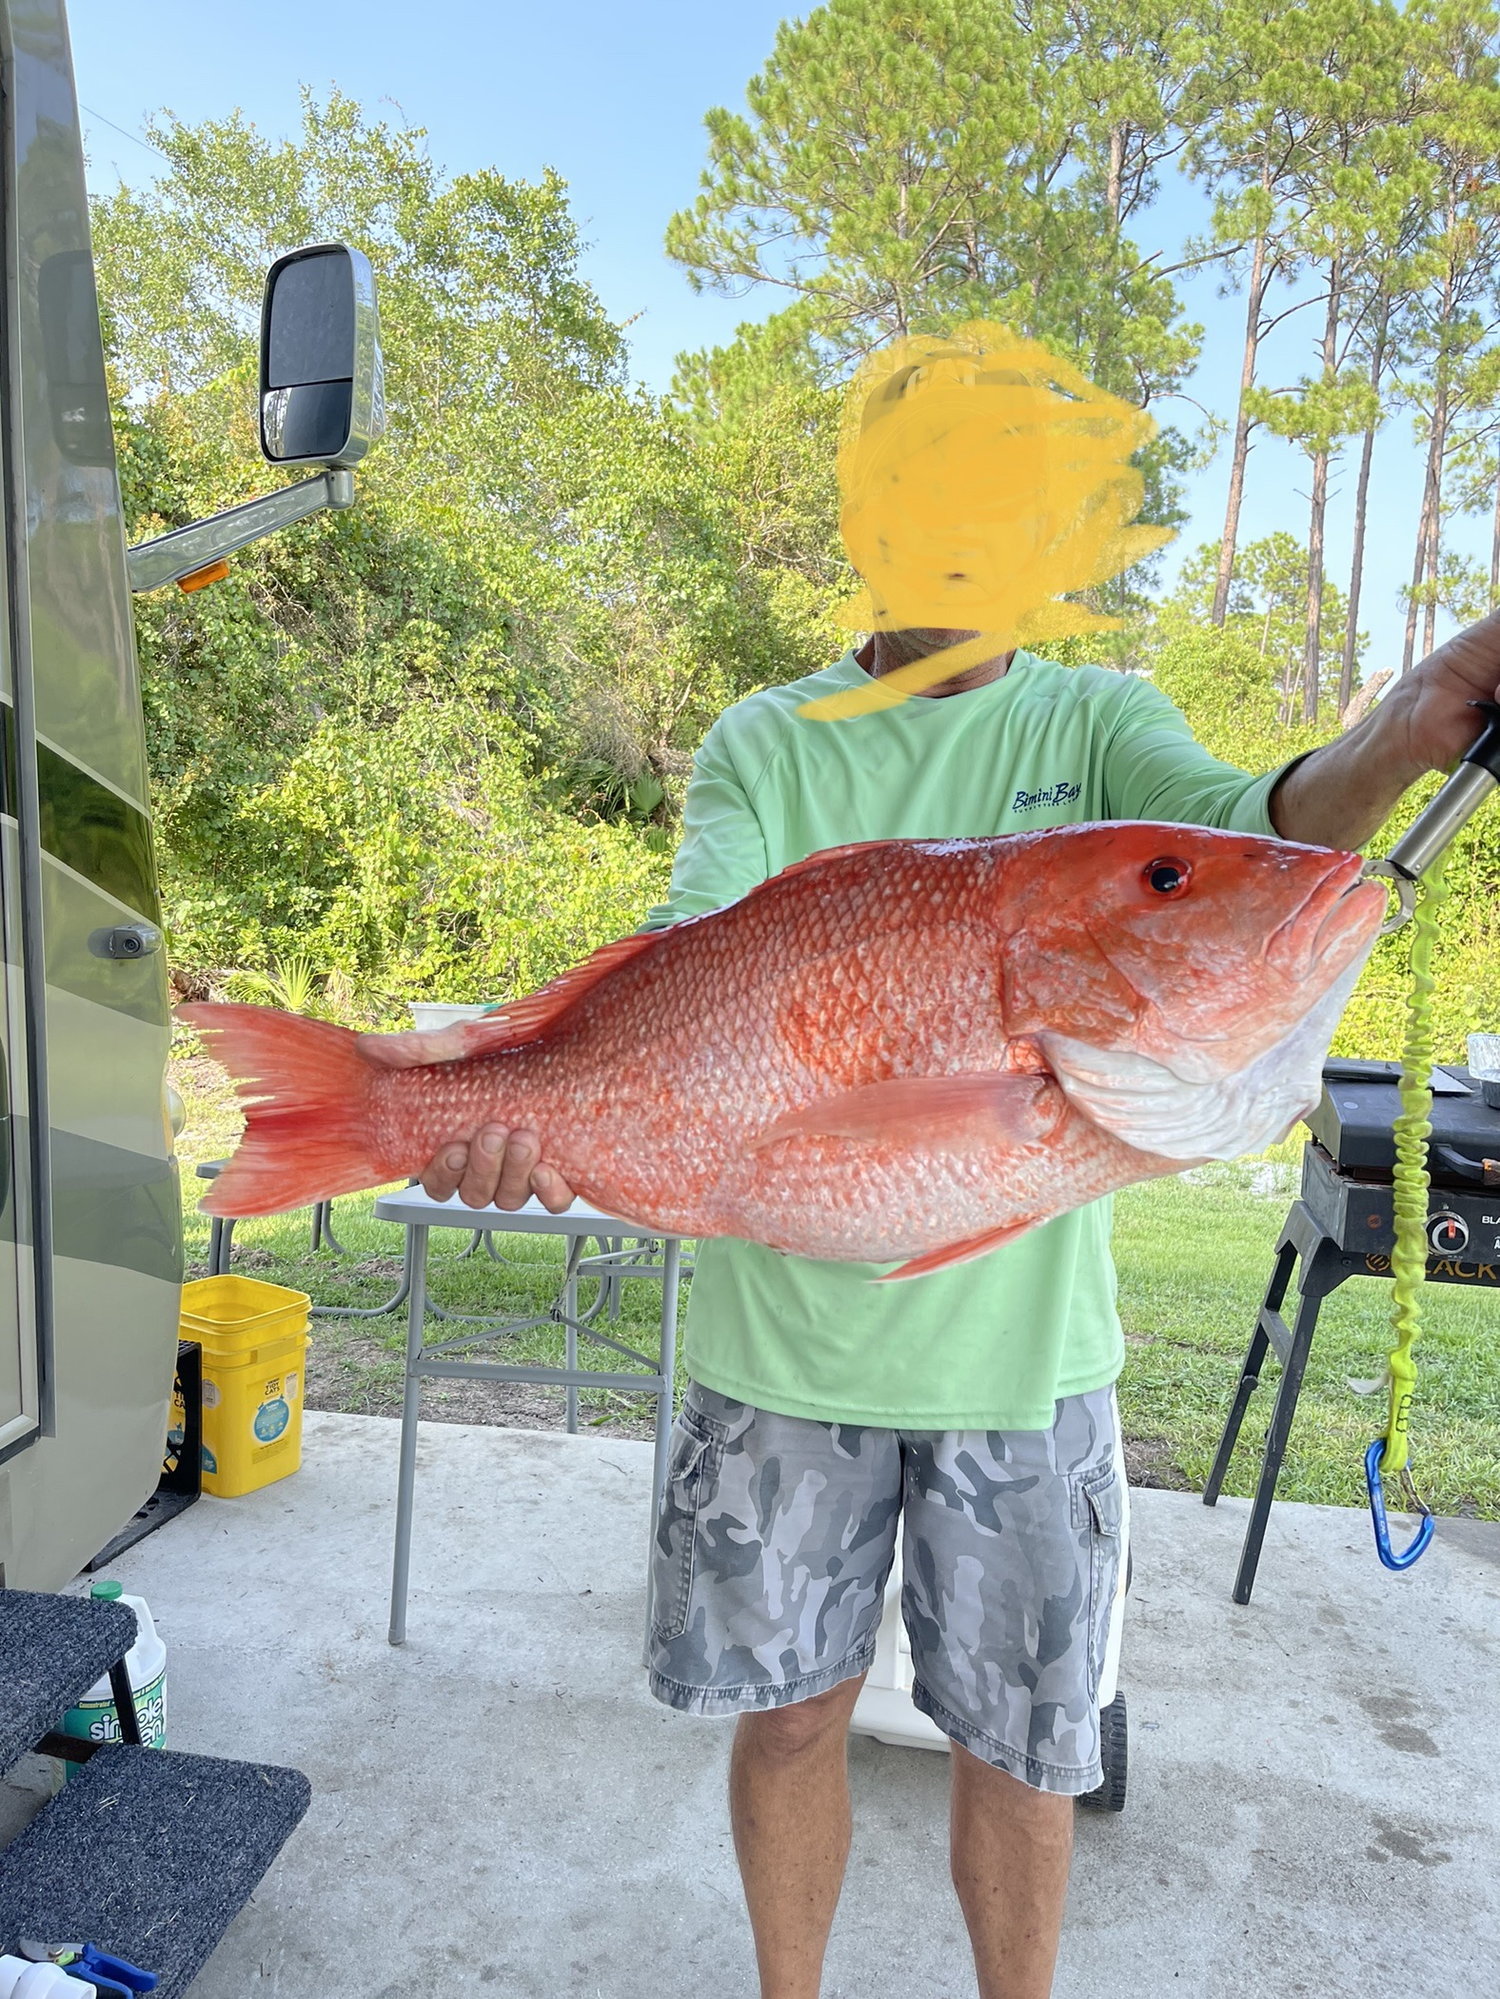 Lightweight Snapper/bottom fishing rod/reel - Page 3 - The Hull Truth -  Boating and Fishing Forum